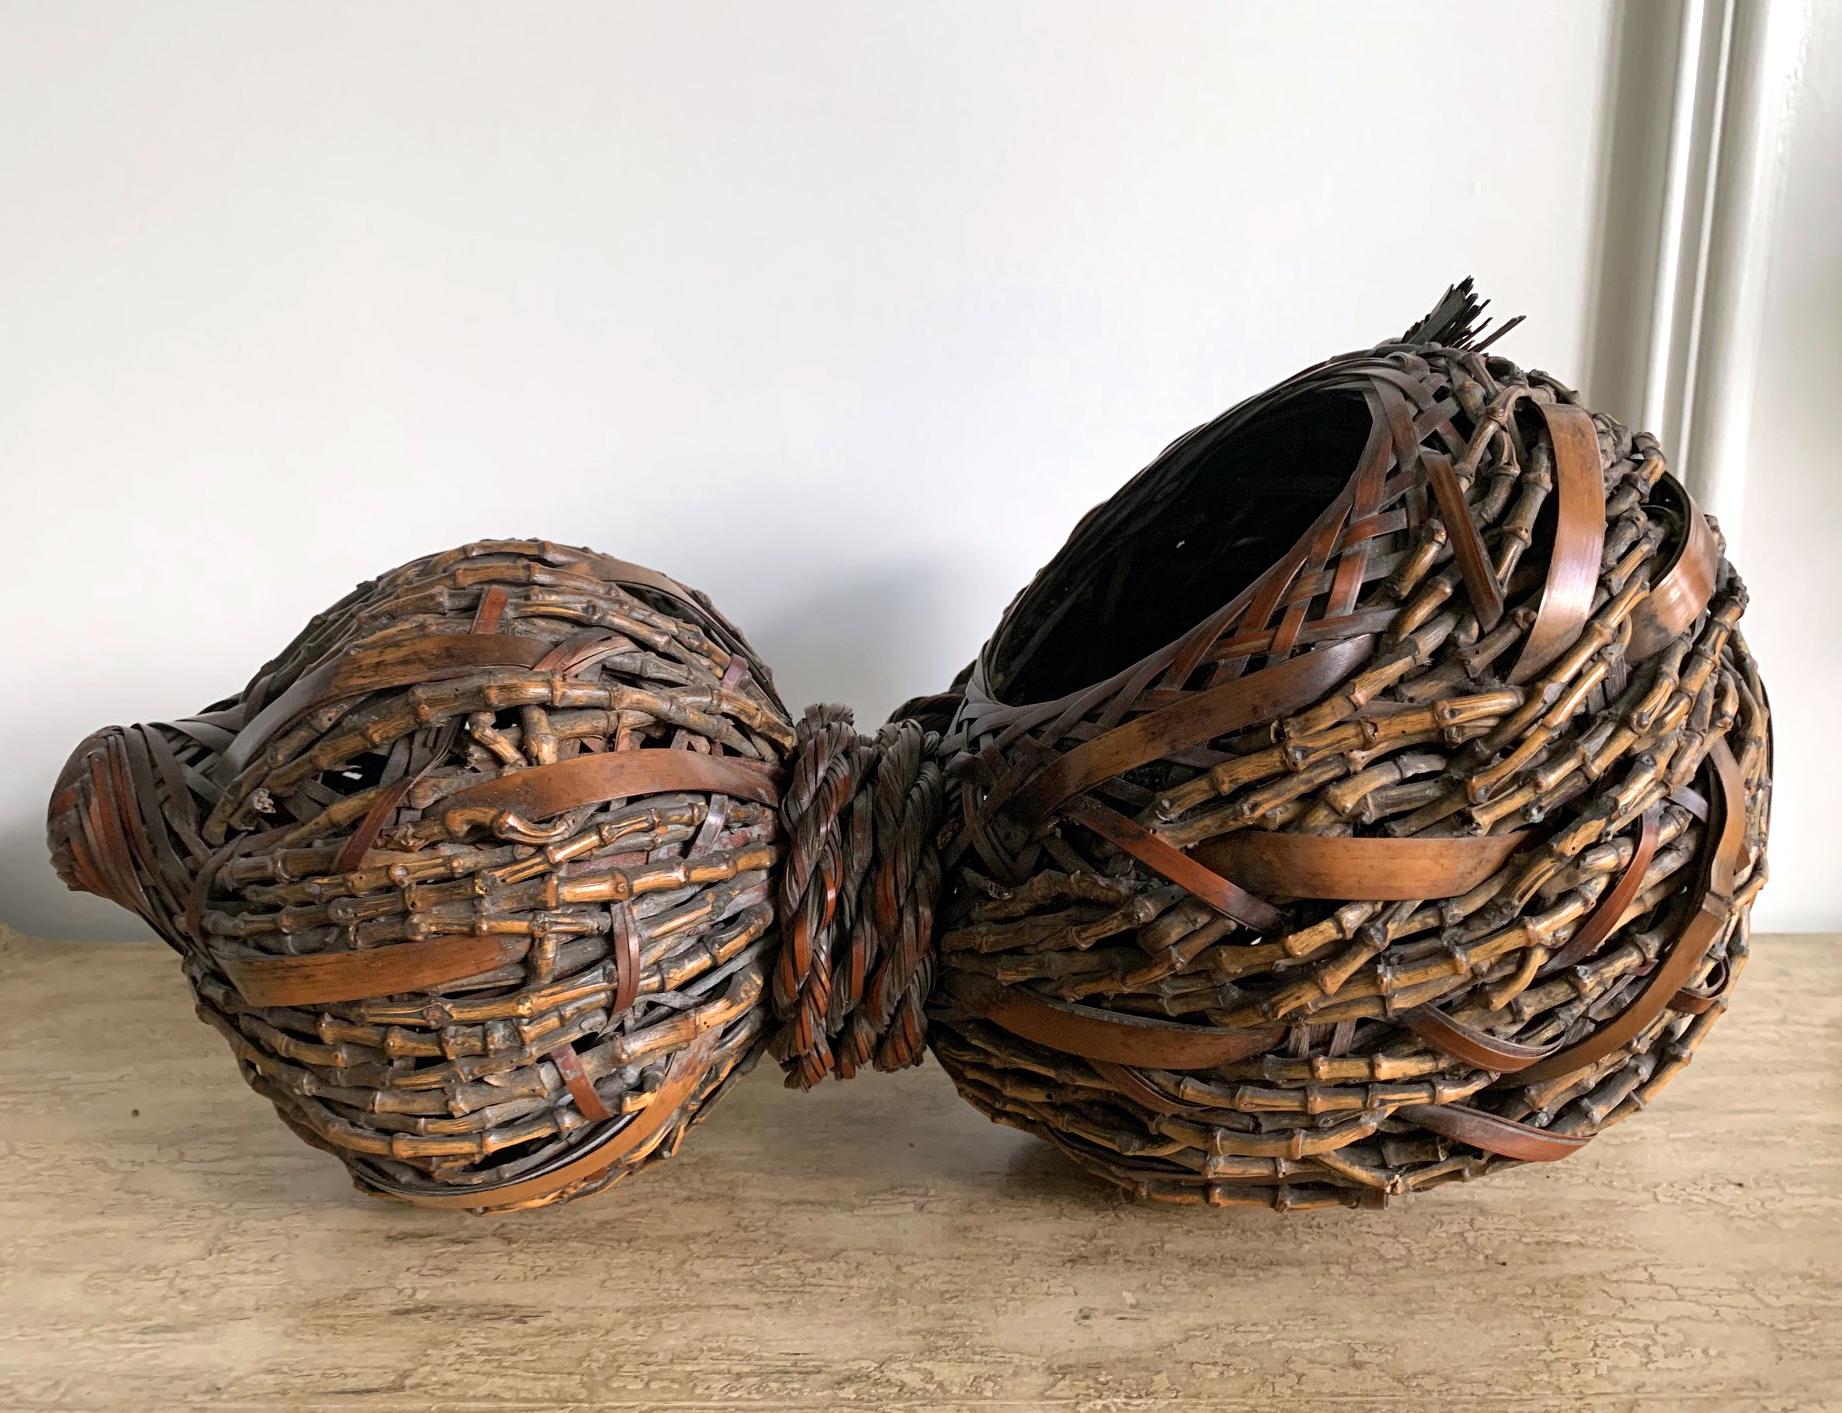 A lovely Japanese bamboo ikebana basket in the shape of gourd with an open mouth and a body circa 1920s-1940s. The piece was woven in great details and styles with mostly irregular and loose twining weaving technique. Several different kinds of